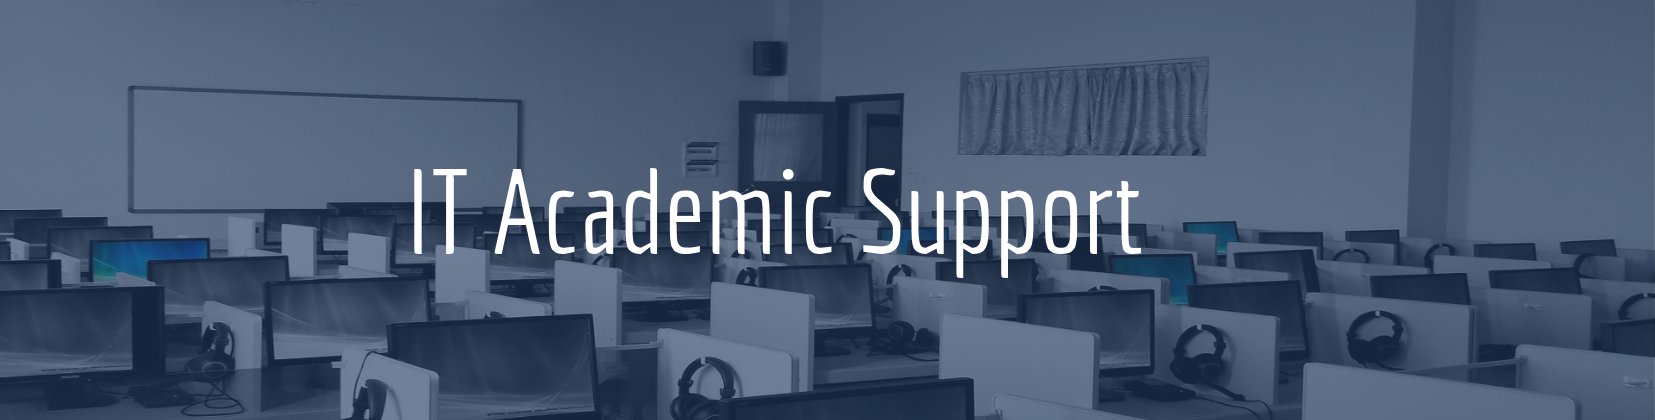 IT Academic Support Services IT Academic Support manages and supports the University' classroom technology and computer labs that provide students, faculty, and staff access to a variety of software applications and computing resources that support education and research.